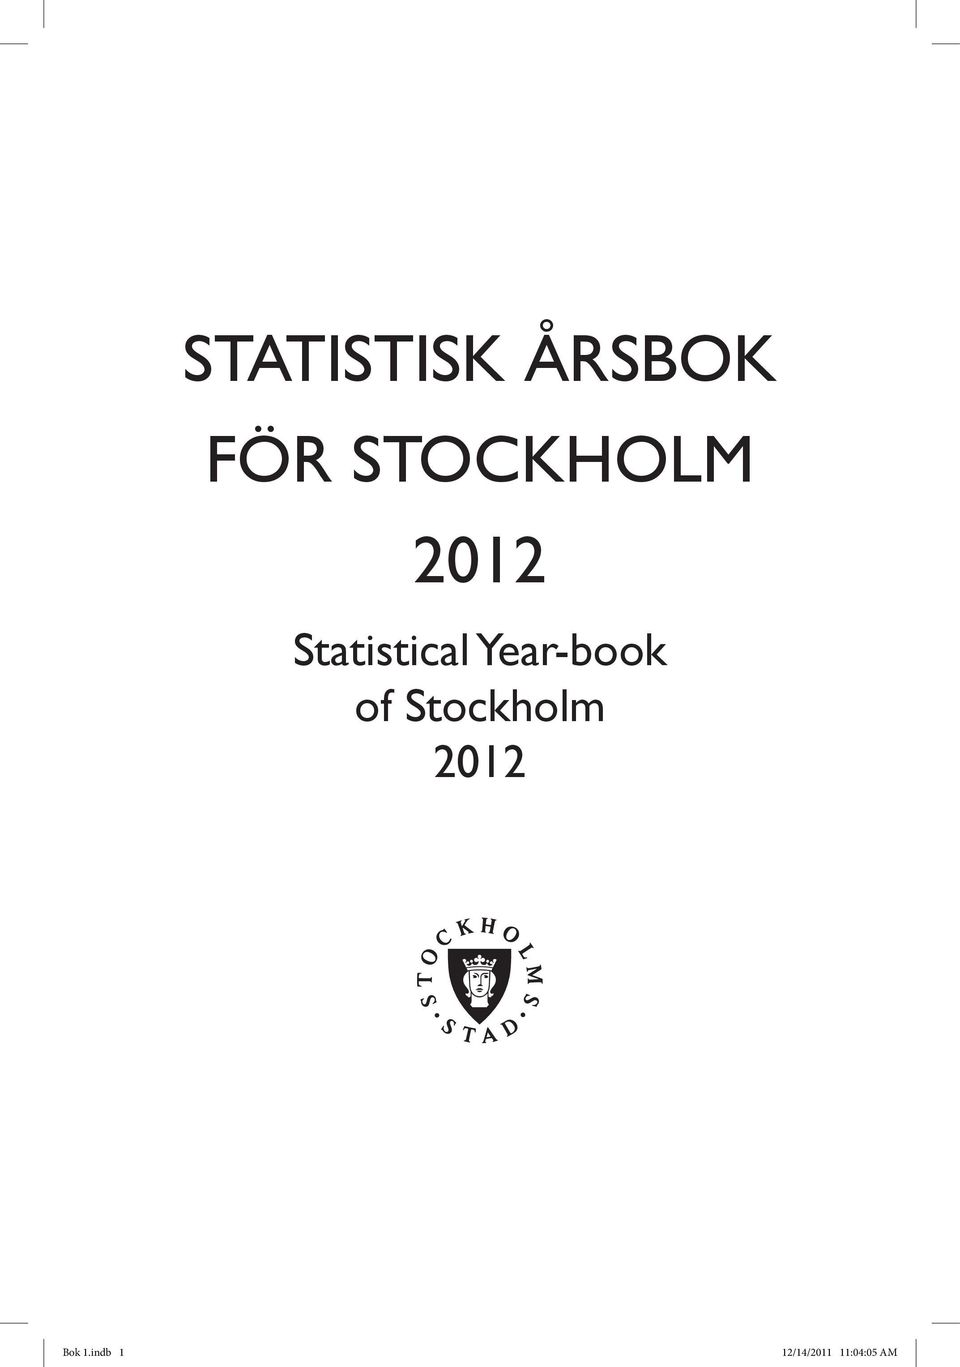 Year-book of Stockholm 2012